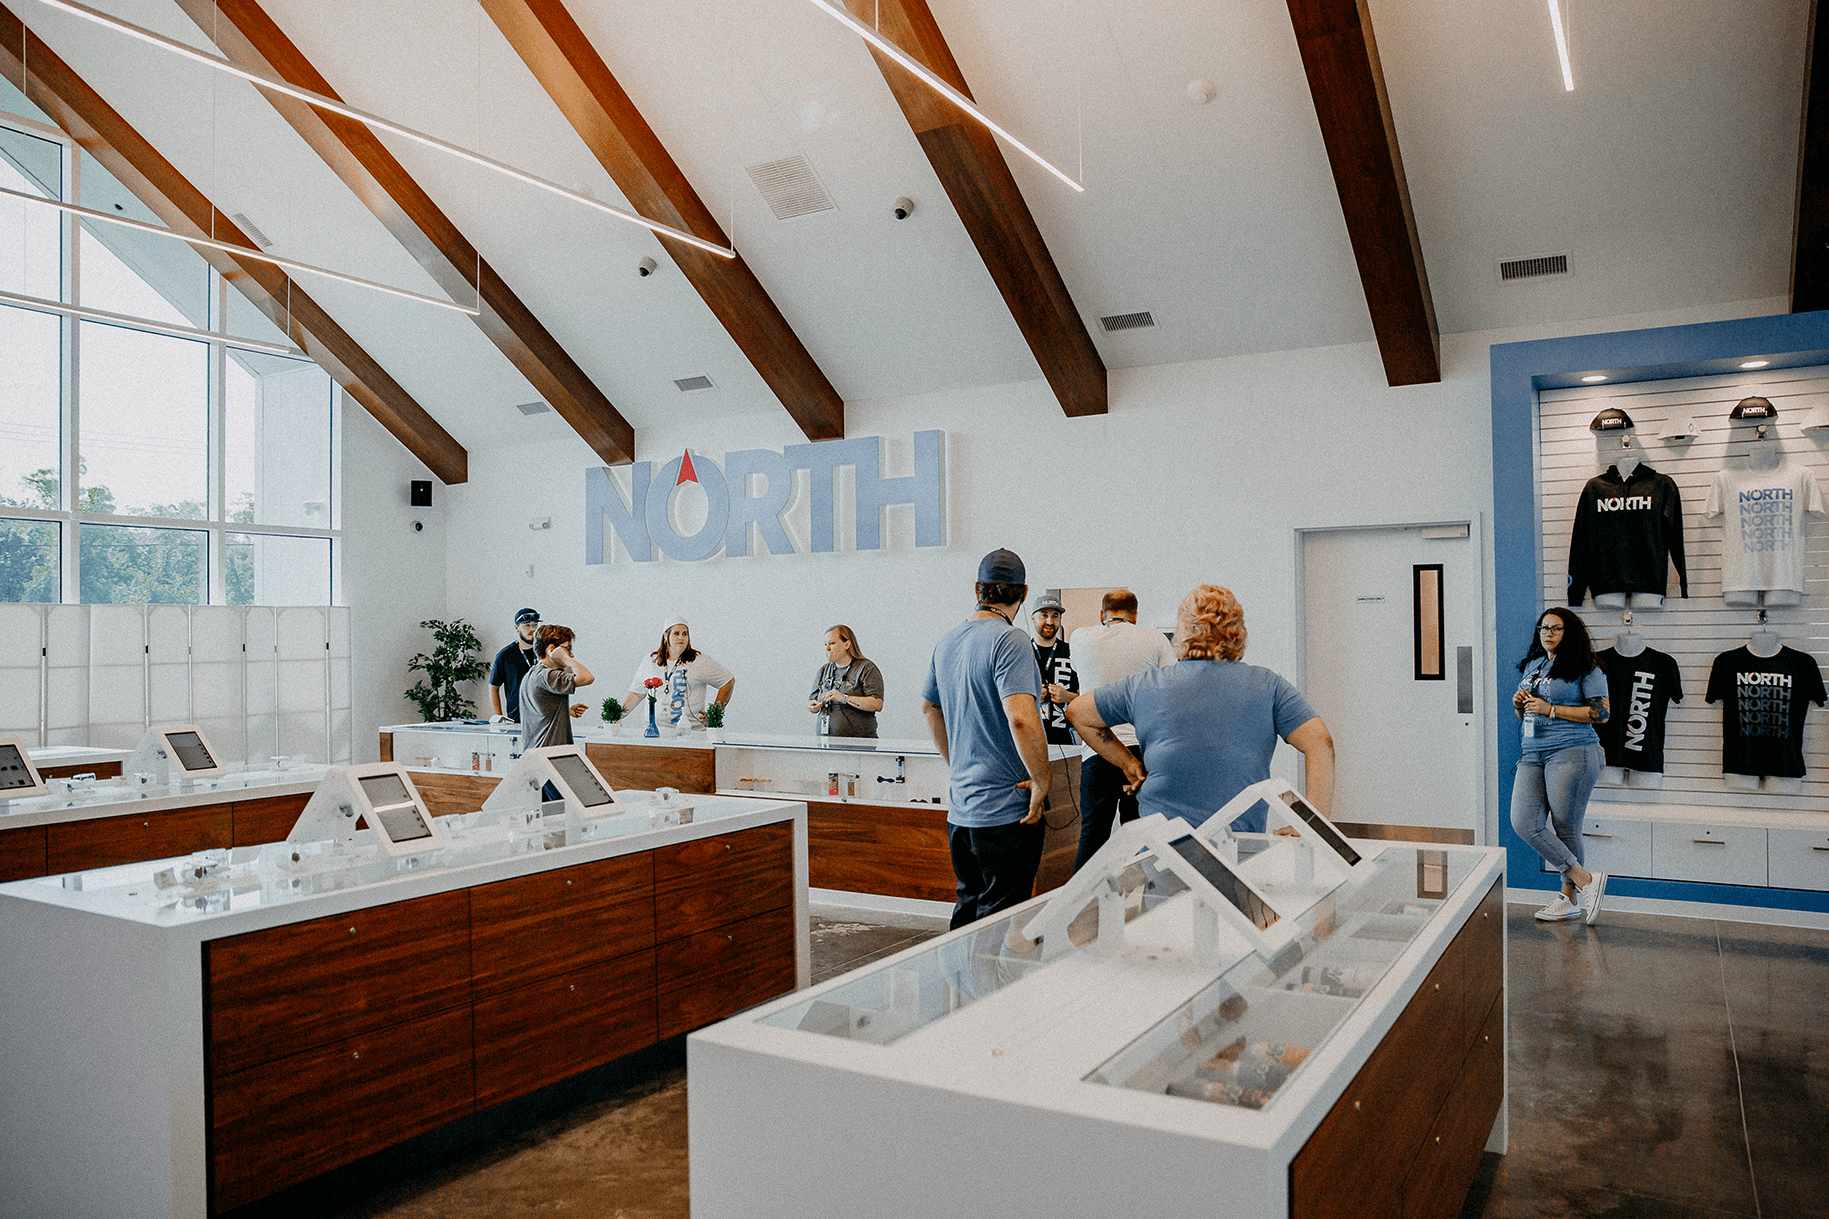 North Dispensaries storefront in Missouri, showcasing a welcoming environment for cannabis enthusiasts.